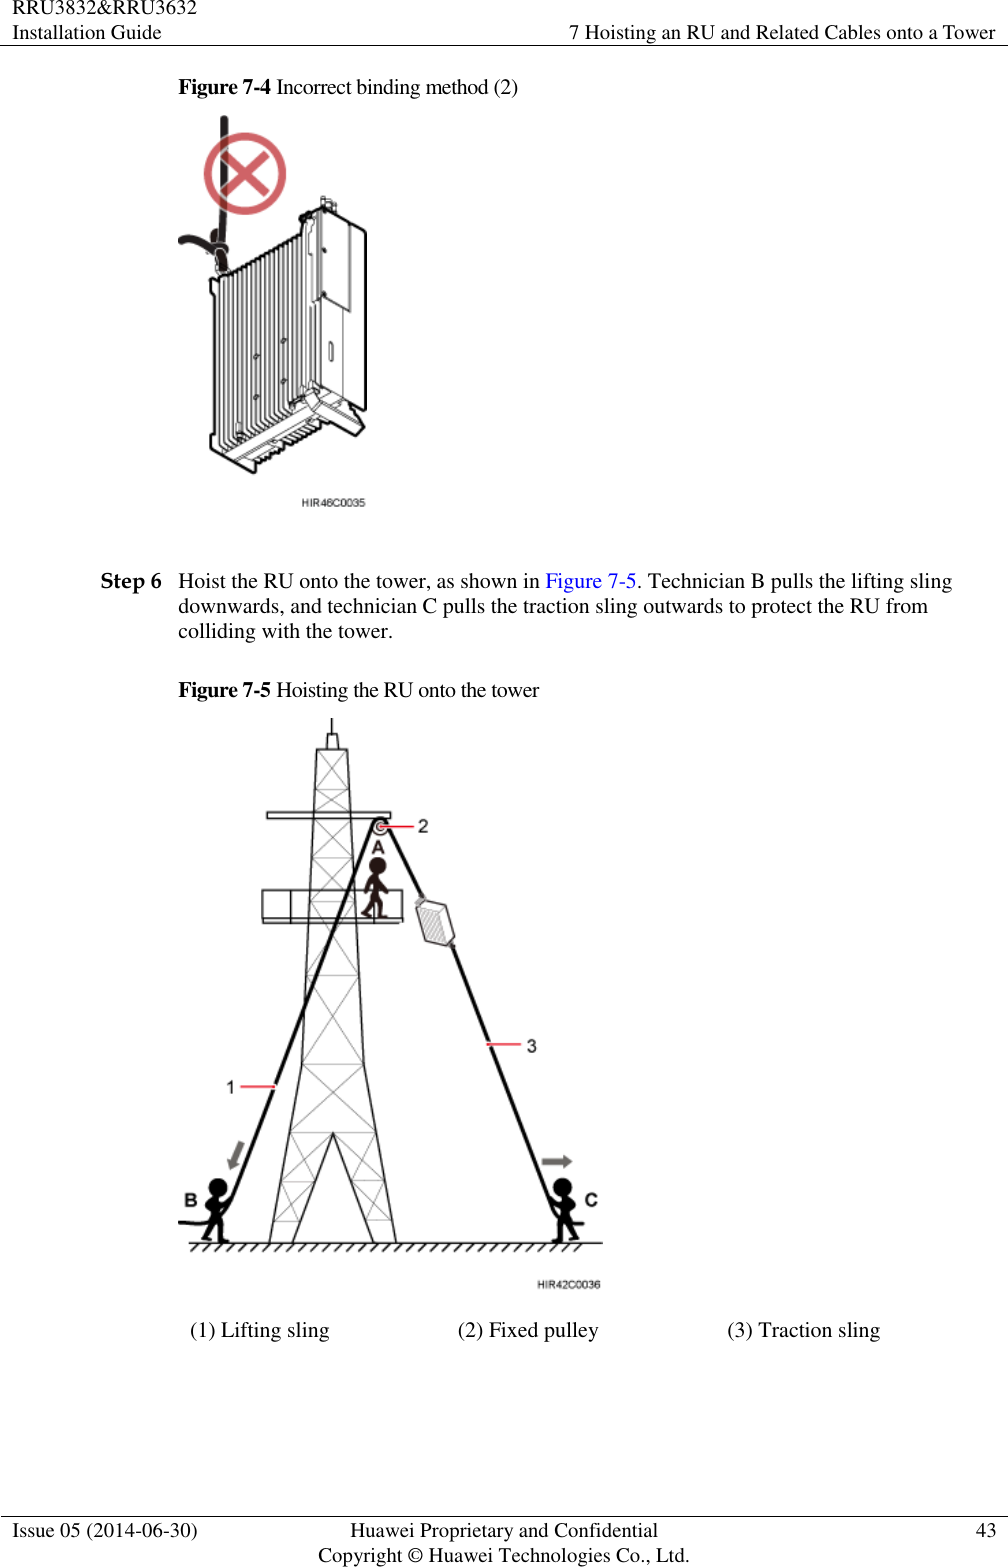 RRU3832&amp;RRU3632 Installation Guide 7 Hoisting an RU and Related Cables onto a Tower  Issue 05 (2014-06-30) Huawei Proprietary and Confidential                                     Copyright © Huawei Technologies Co., Ltd. 43  Figure 7-4 Incorrect binding method (2)   Step 6 Hoist the RU onto the tower, as shown in Figure 7-5. Technician B pulls the lifting sling downwards, and technician C pulls the traction sling outwards to protect the RU from colliding with the tower. Figure 7-5 Hoisting the RU onto the tower  (1) Lifting sling (2) Fixed pulley (3) Traction sling   